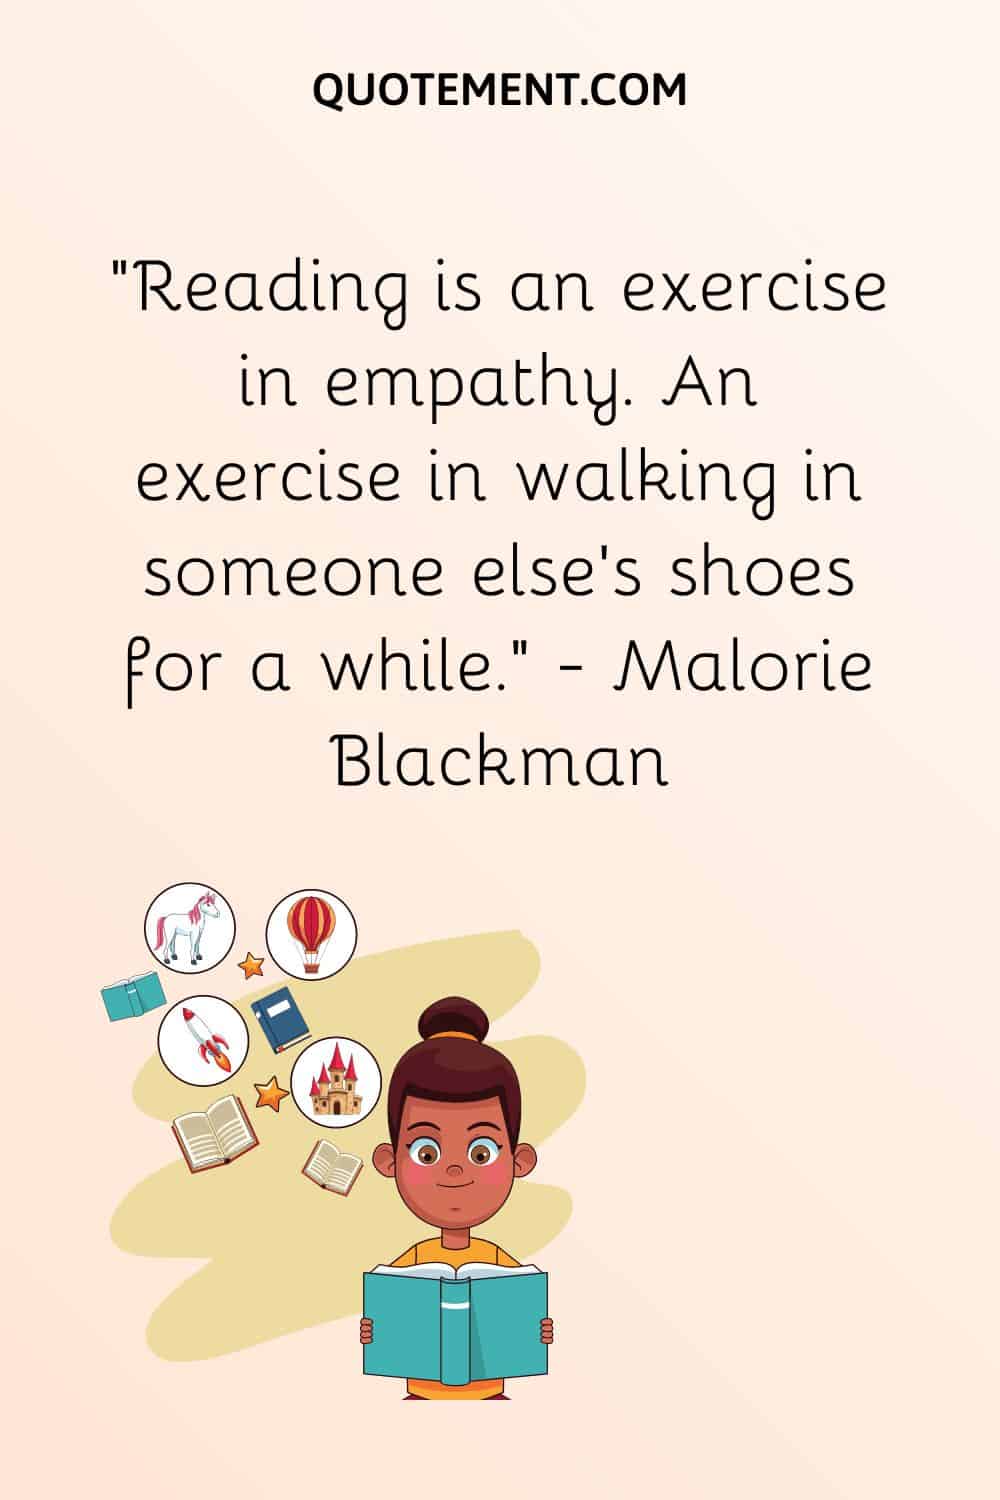 “Reading is an exercise in empathy. An exercise in walking in someone else’s shoes for a while.” — Malorie Blackman